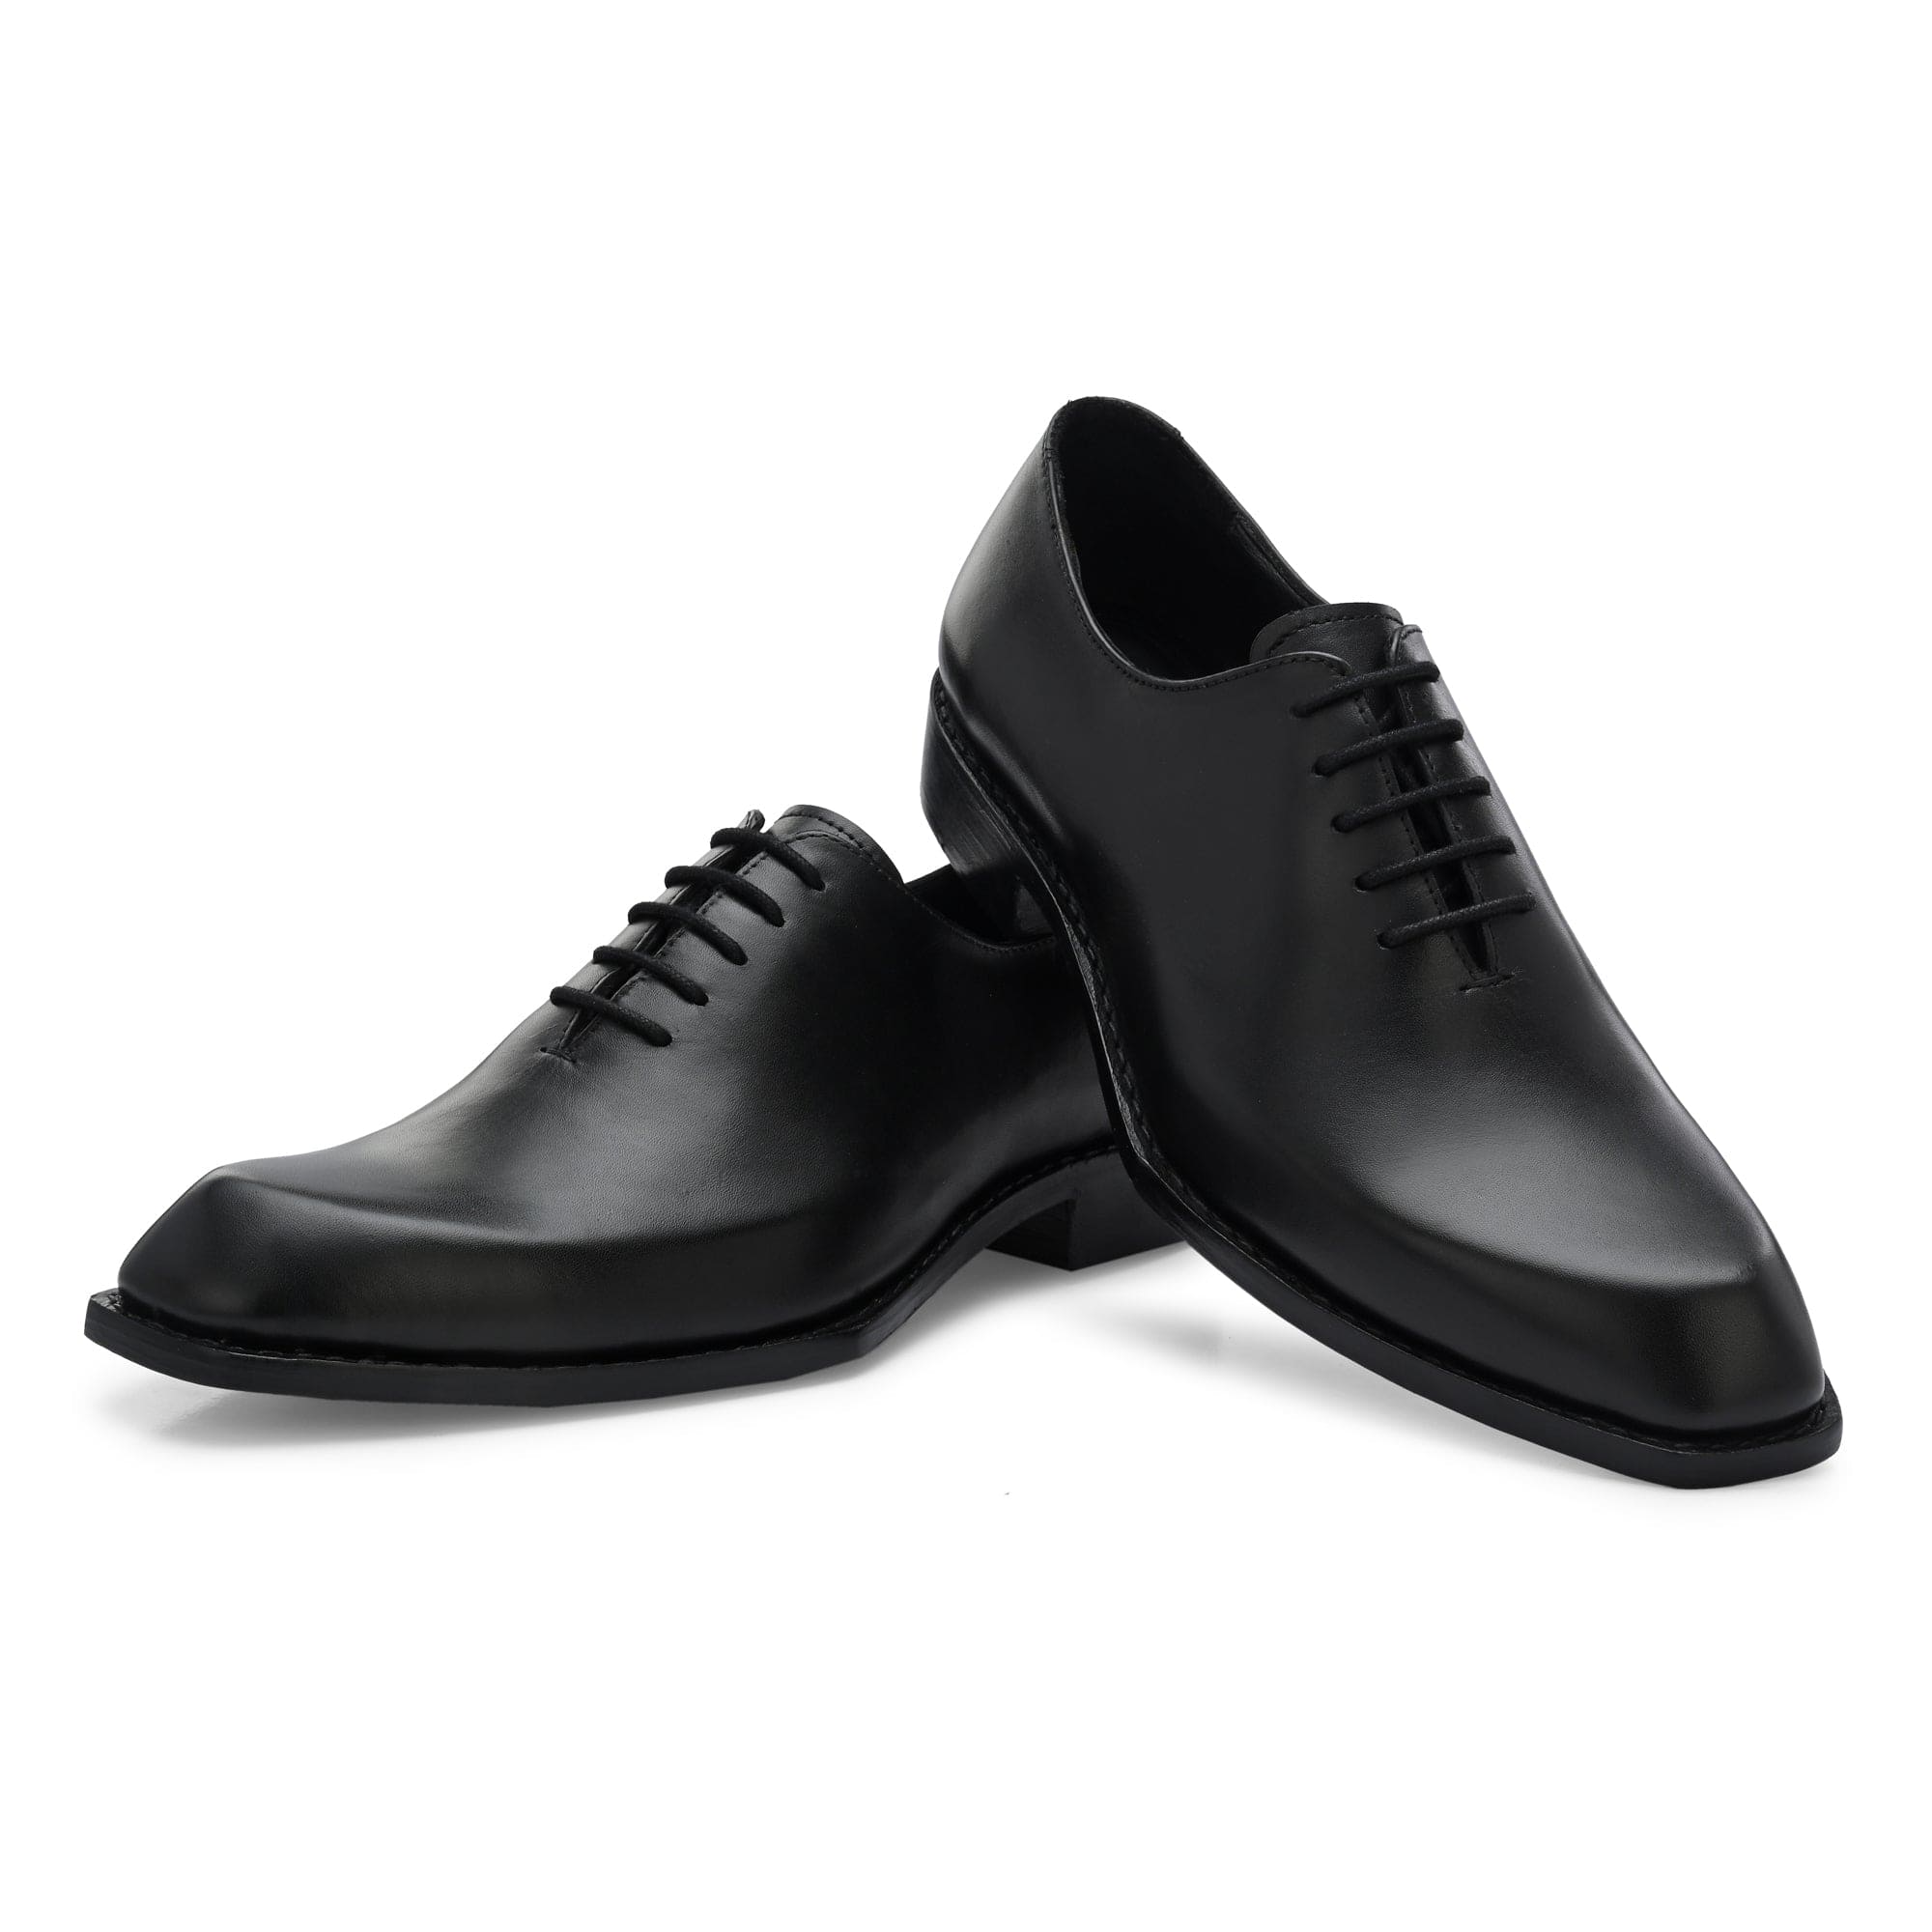 Edge Oxford Diamond Shaped Black Italian Leather Dress Shoes Reverse Goodyear Welted